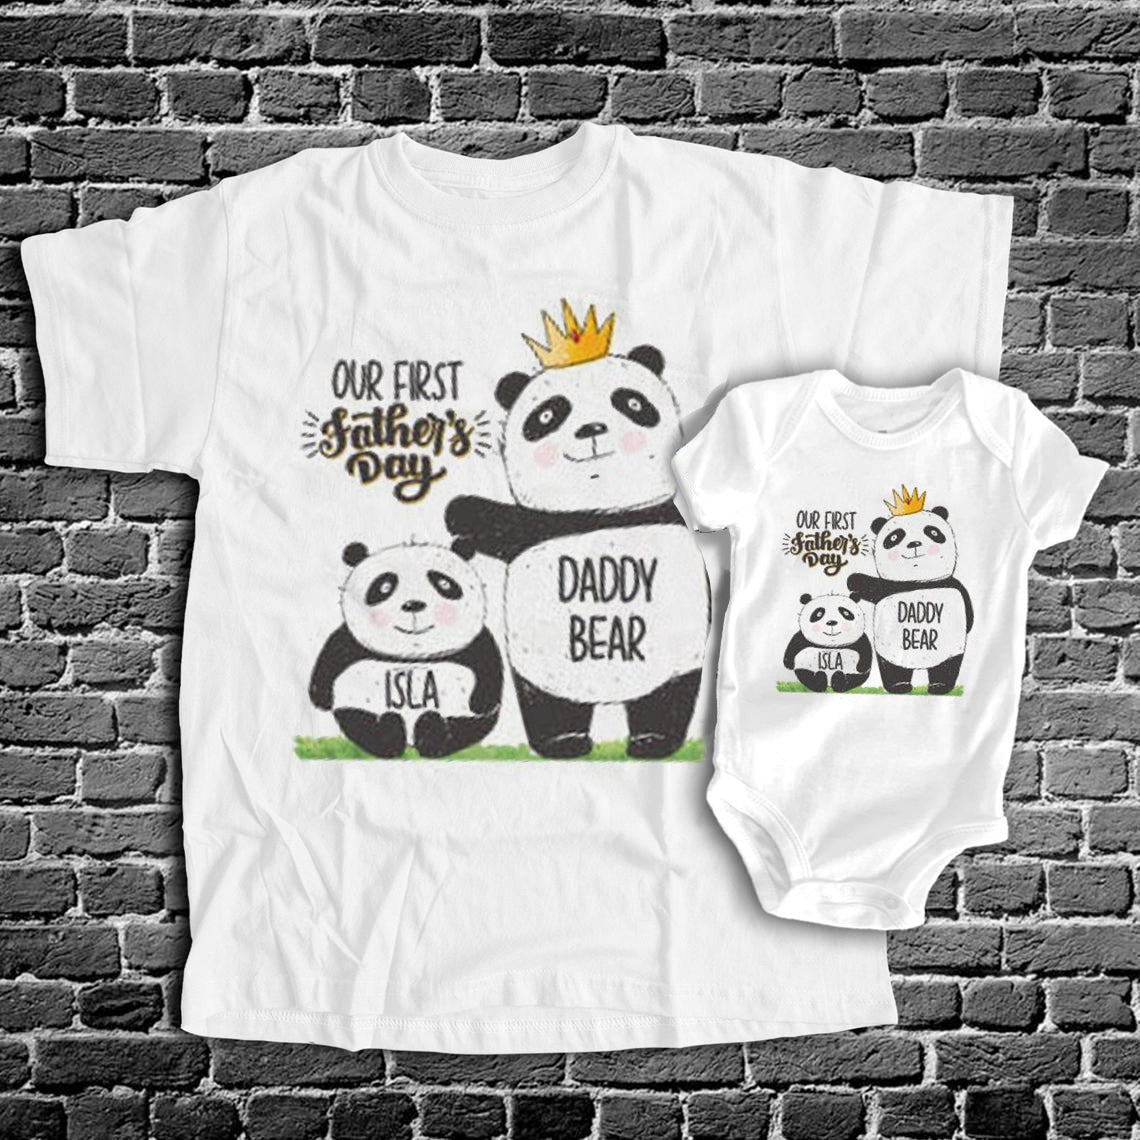 bagage mozaïek vieren Dad And Baby Our First Father's Day Panda Personalized Matching Shirt -  Family Panda - Unique gifting for family bonding